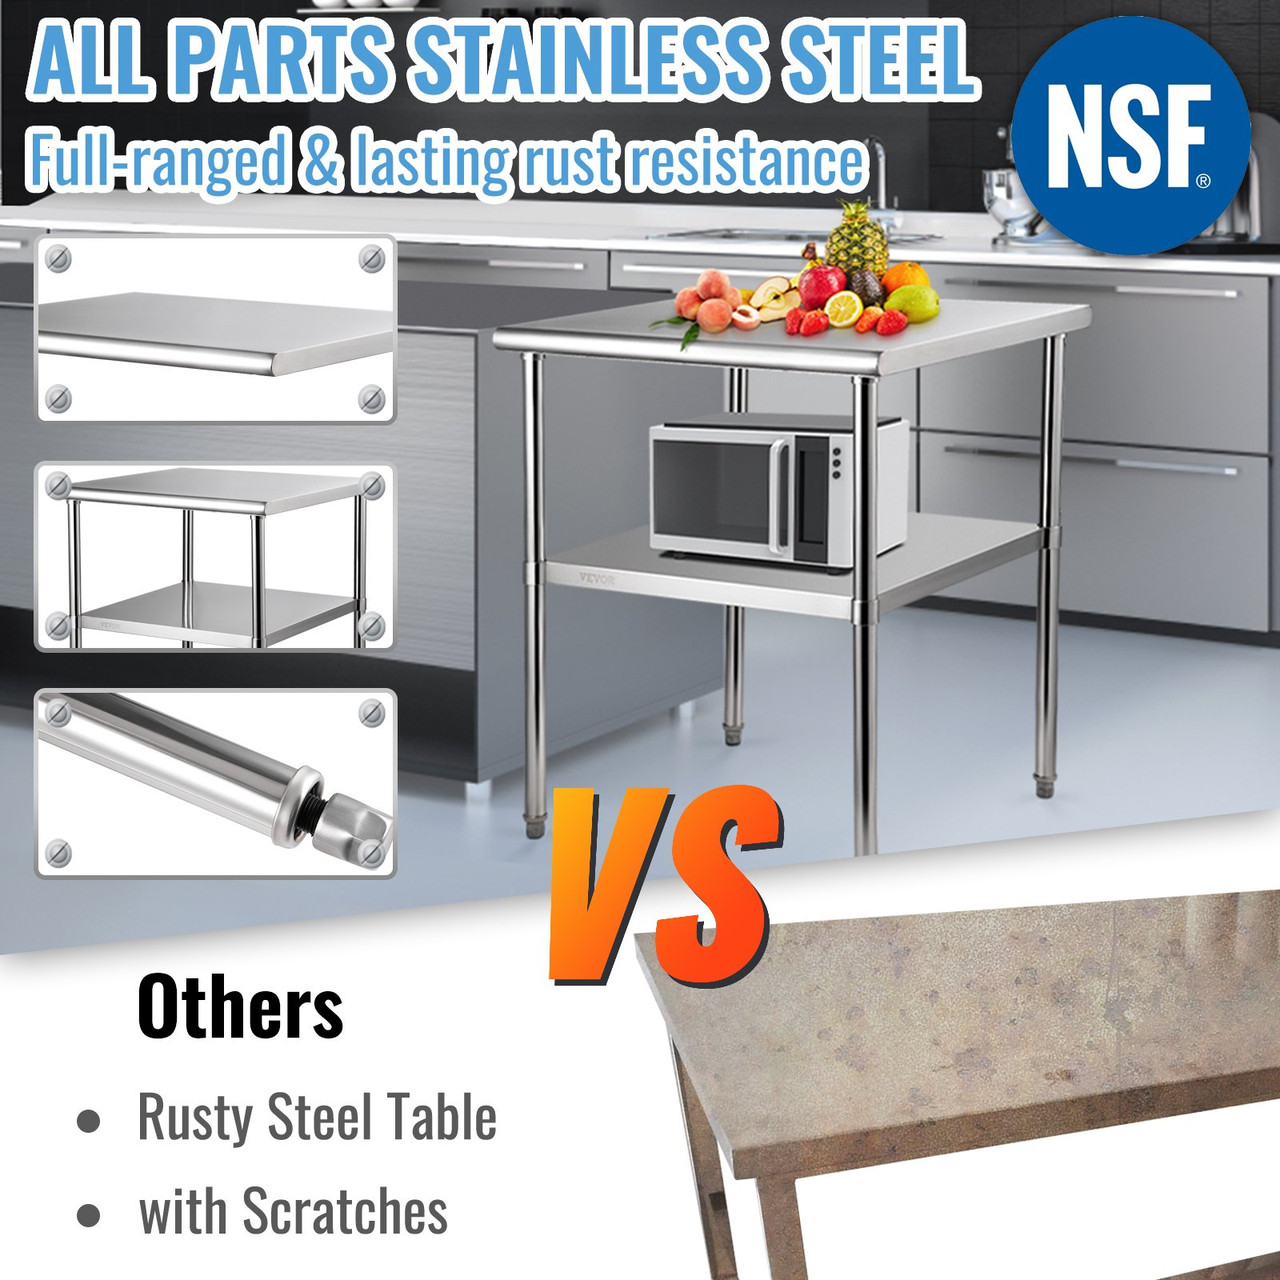 Stainless Steel Prep Table, 30 x 30 x 36 Inch, 800lbs Load Capacity Heavy Duty Metal Worktable with Adjustable Undershelf & Feet, Commercial Workstation for Kitchen Garage Restaurant Backyard